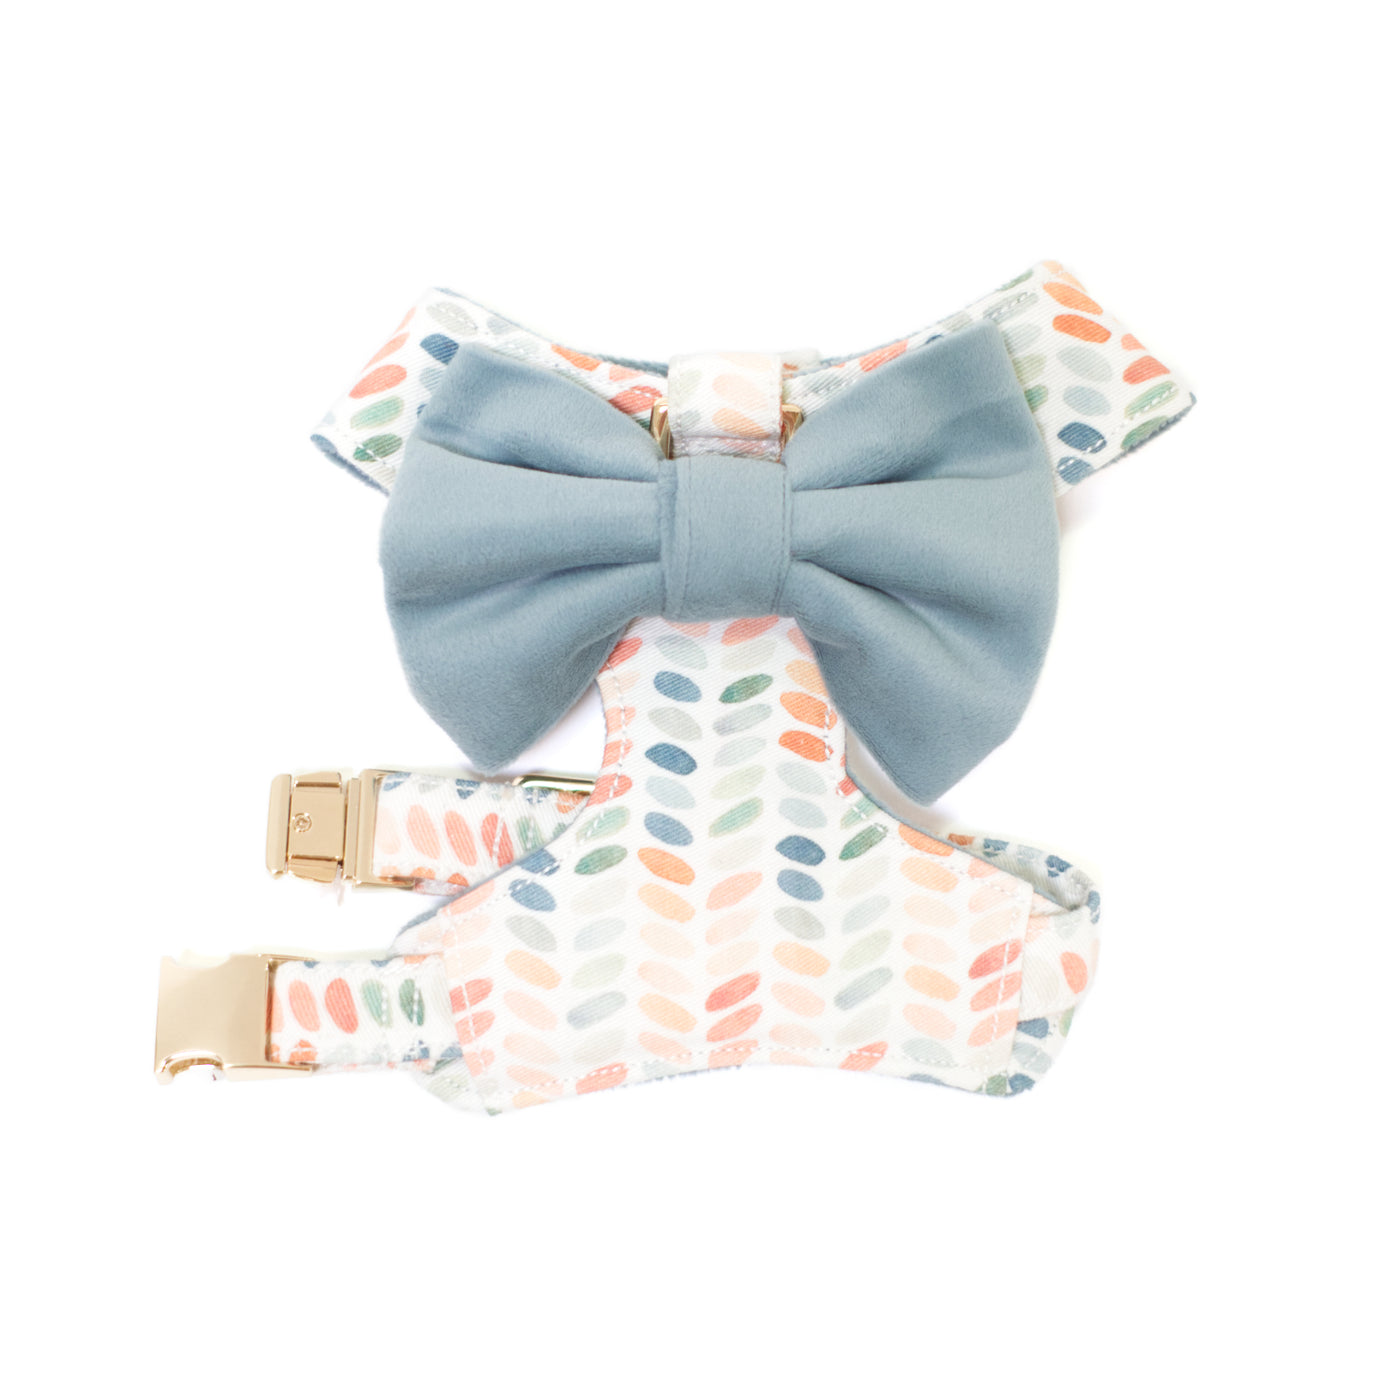 Size XS reversible dot harness in blue, green and terra cotta dot print and blue velvet bow tie.